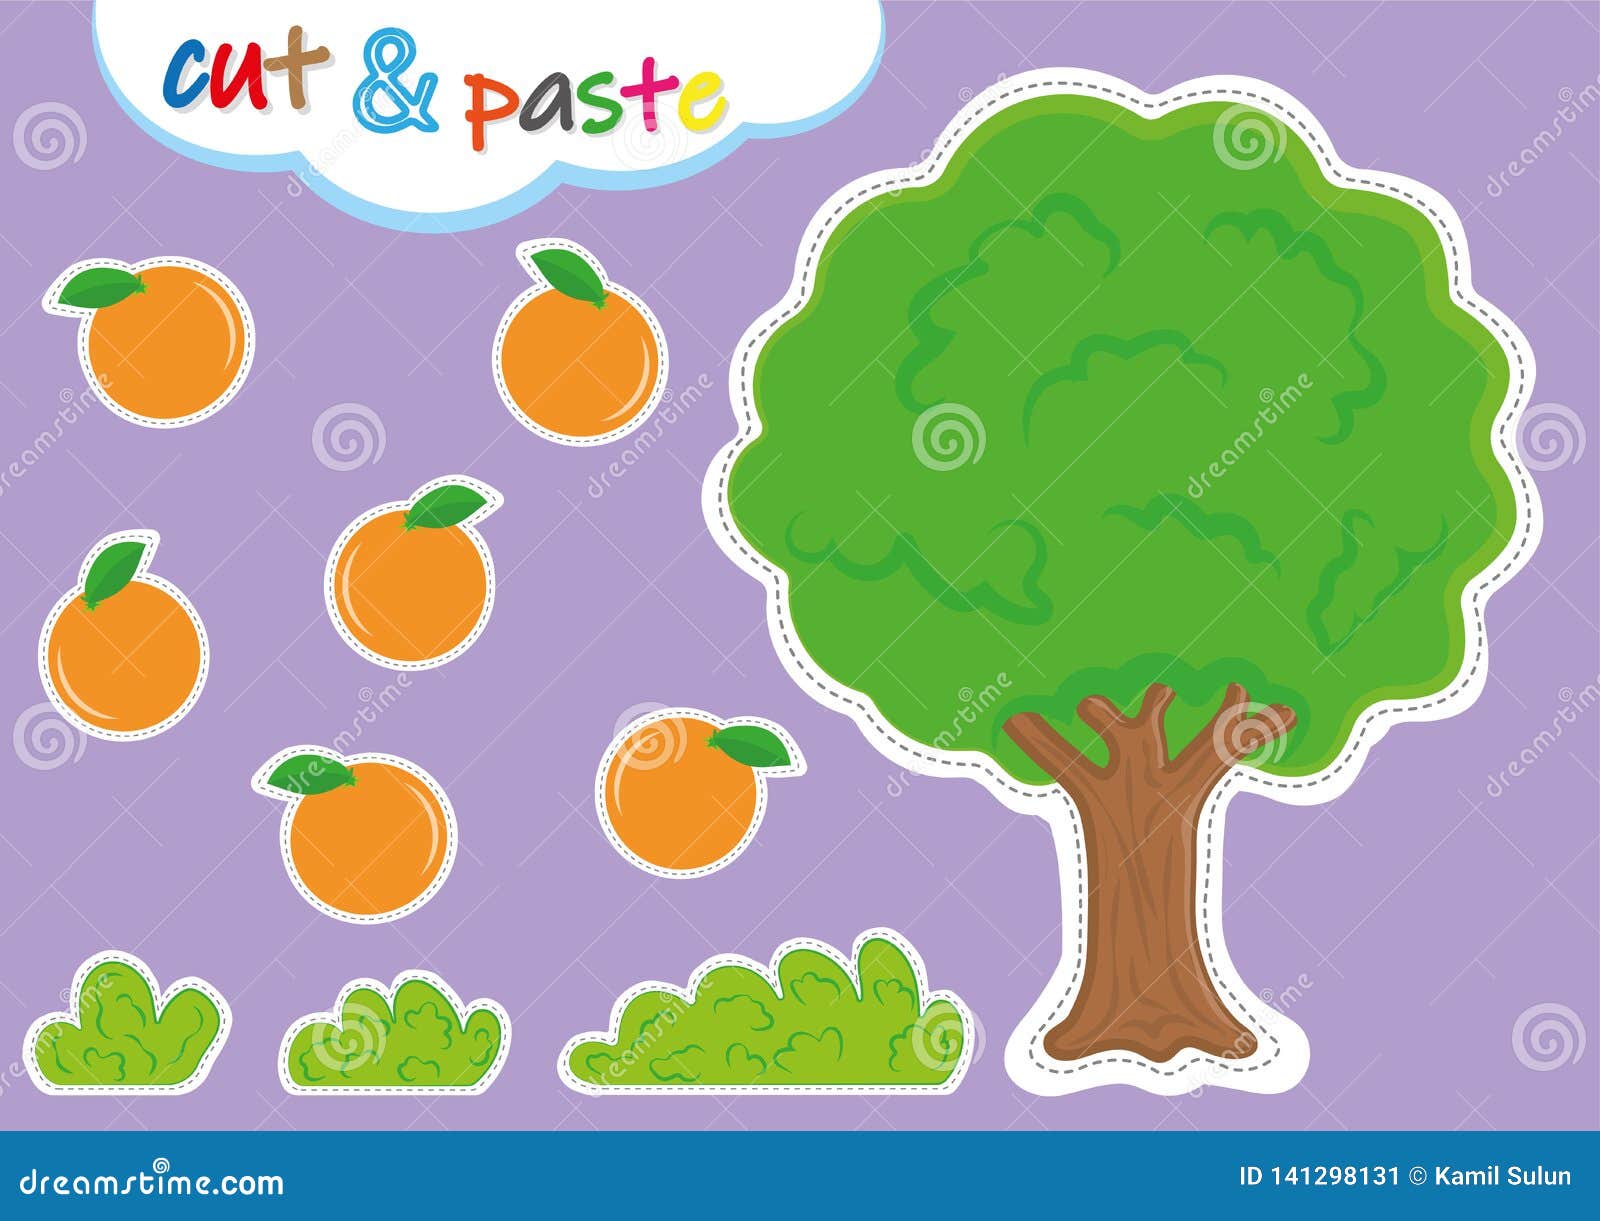 Cut And Paste Activities For Kindergarten Preschool Cutting And Pasting Worksheets Stock Illustration Illustration Of Colorful Vector 141298131